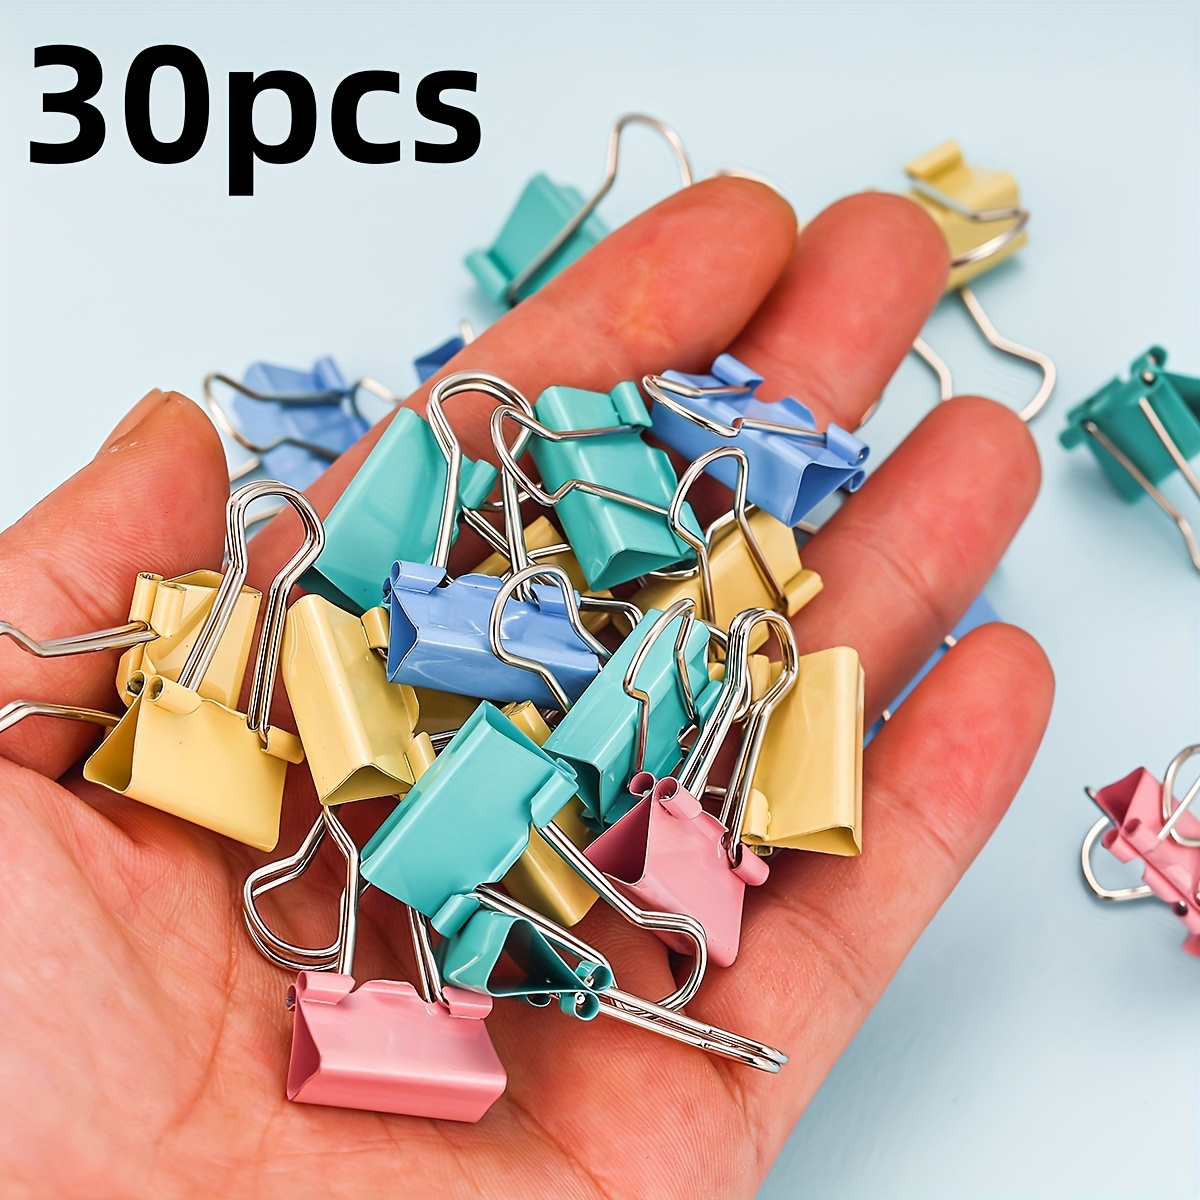 

20pcs Mixed Color Long Tail Clip Folder - Perfect For Office Supplies & Test Paper Book Clips!